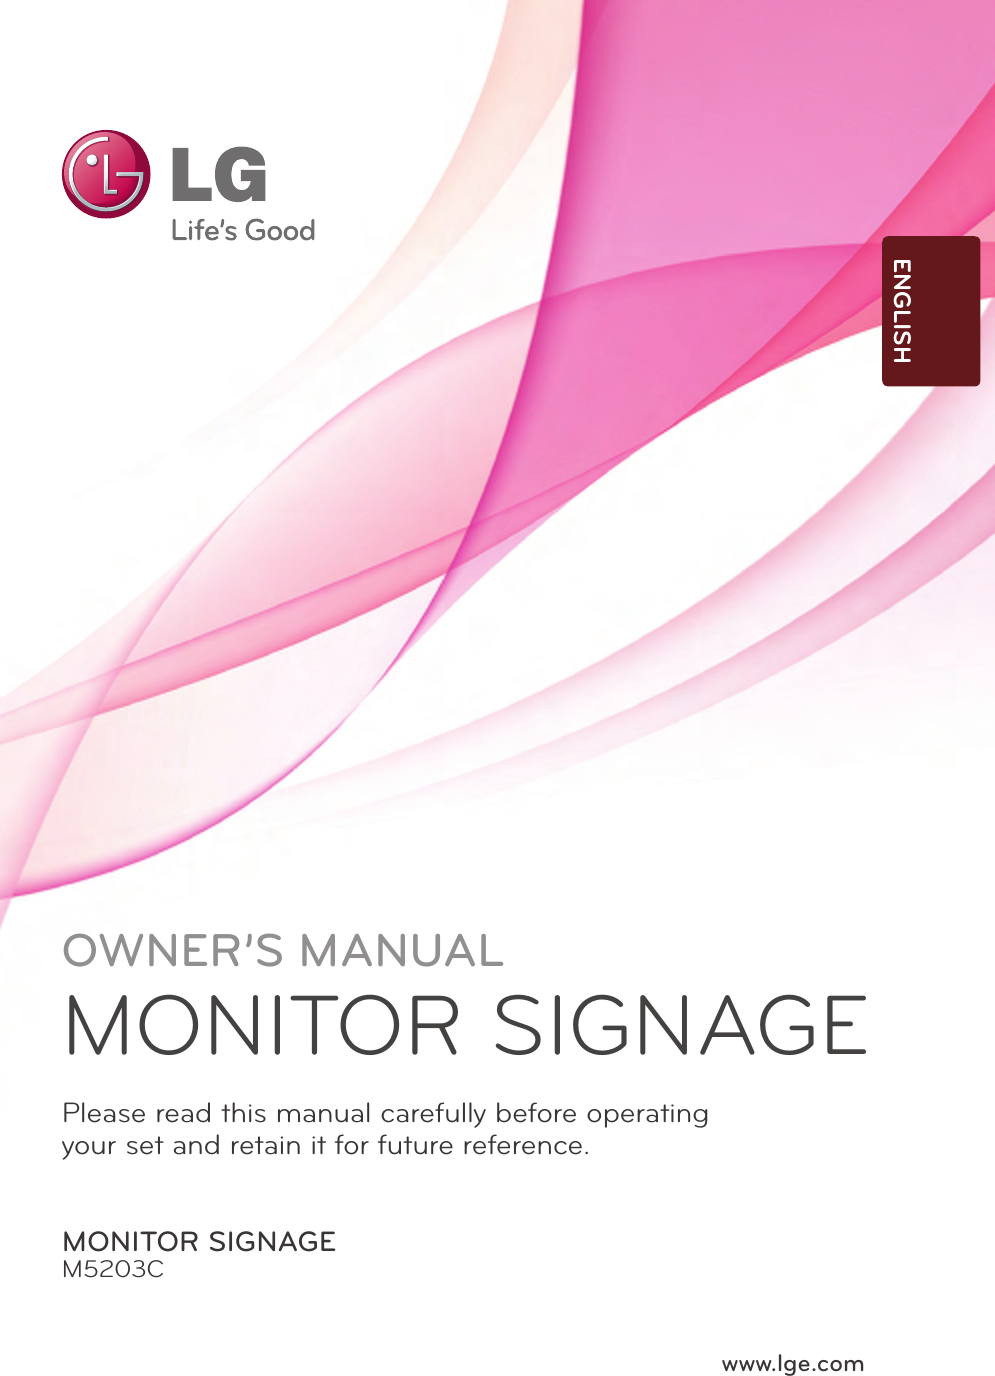 1www.lge.comOWNER’S MANUALMONITOR SIGNAGEMONITOR SIGNAGEM5203CPlease read this manual carefully before operatingyour set and retain it for future reference.ENGLISH